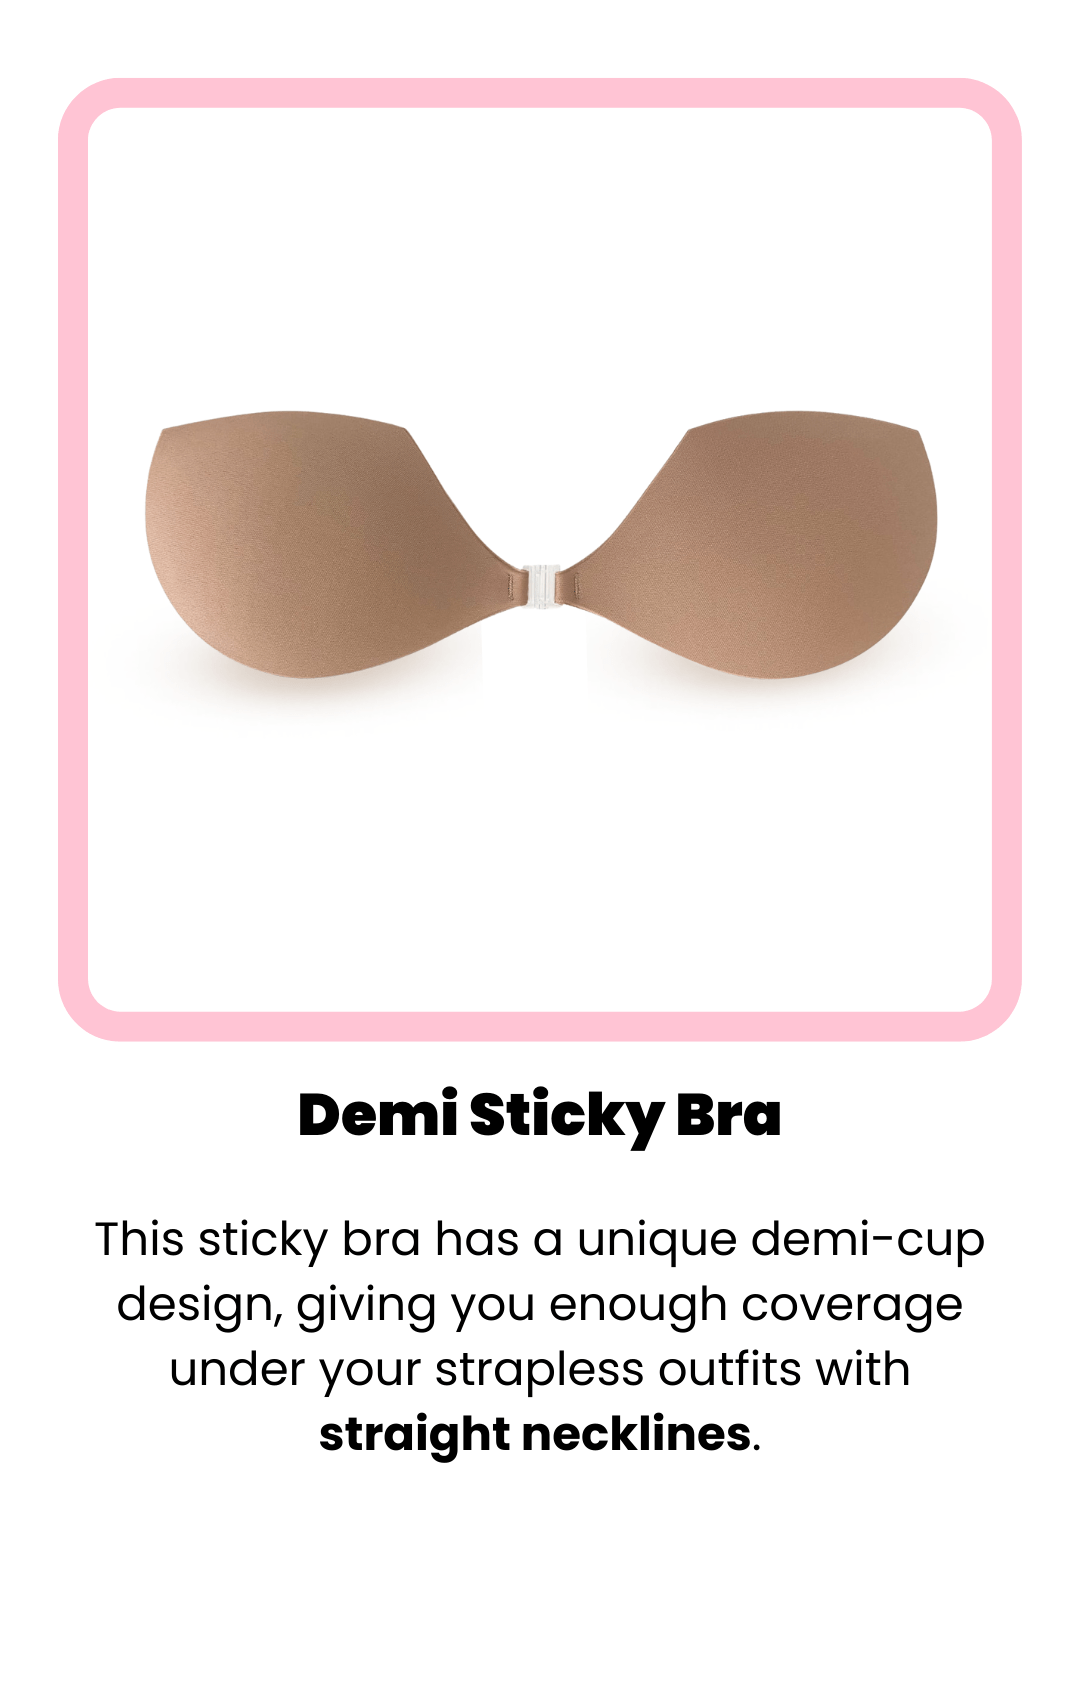 no serously this stick on bra inserts from @BOOMBA is AMAZING They are